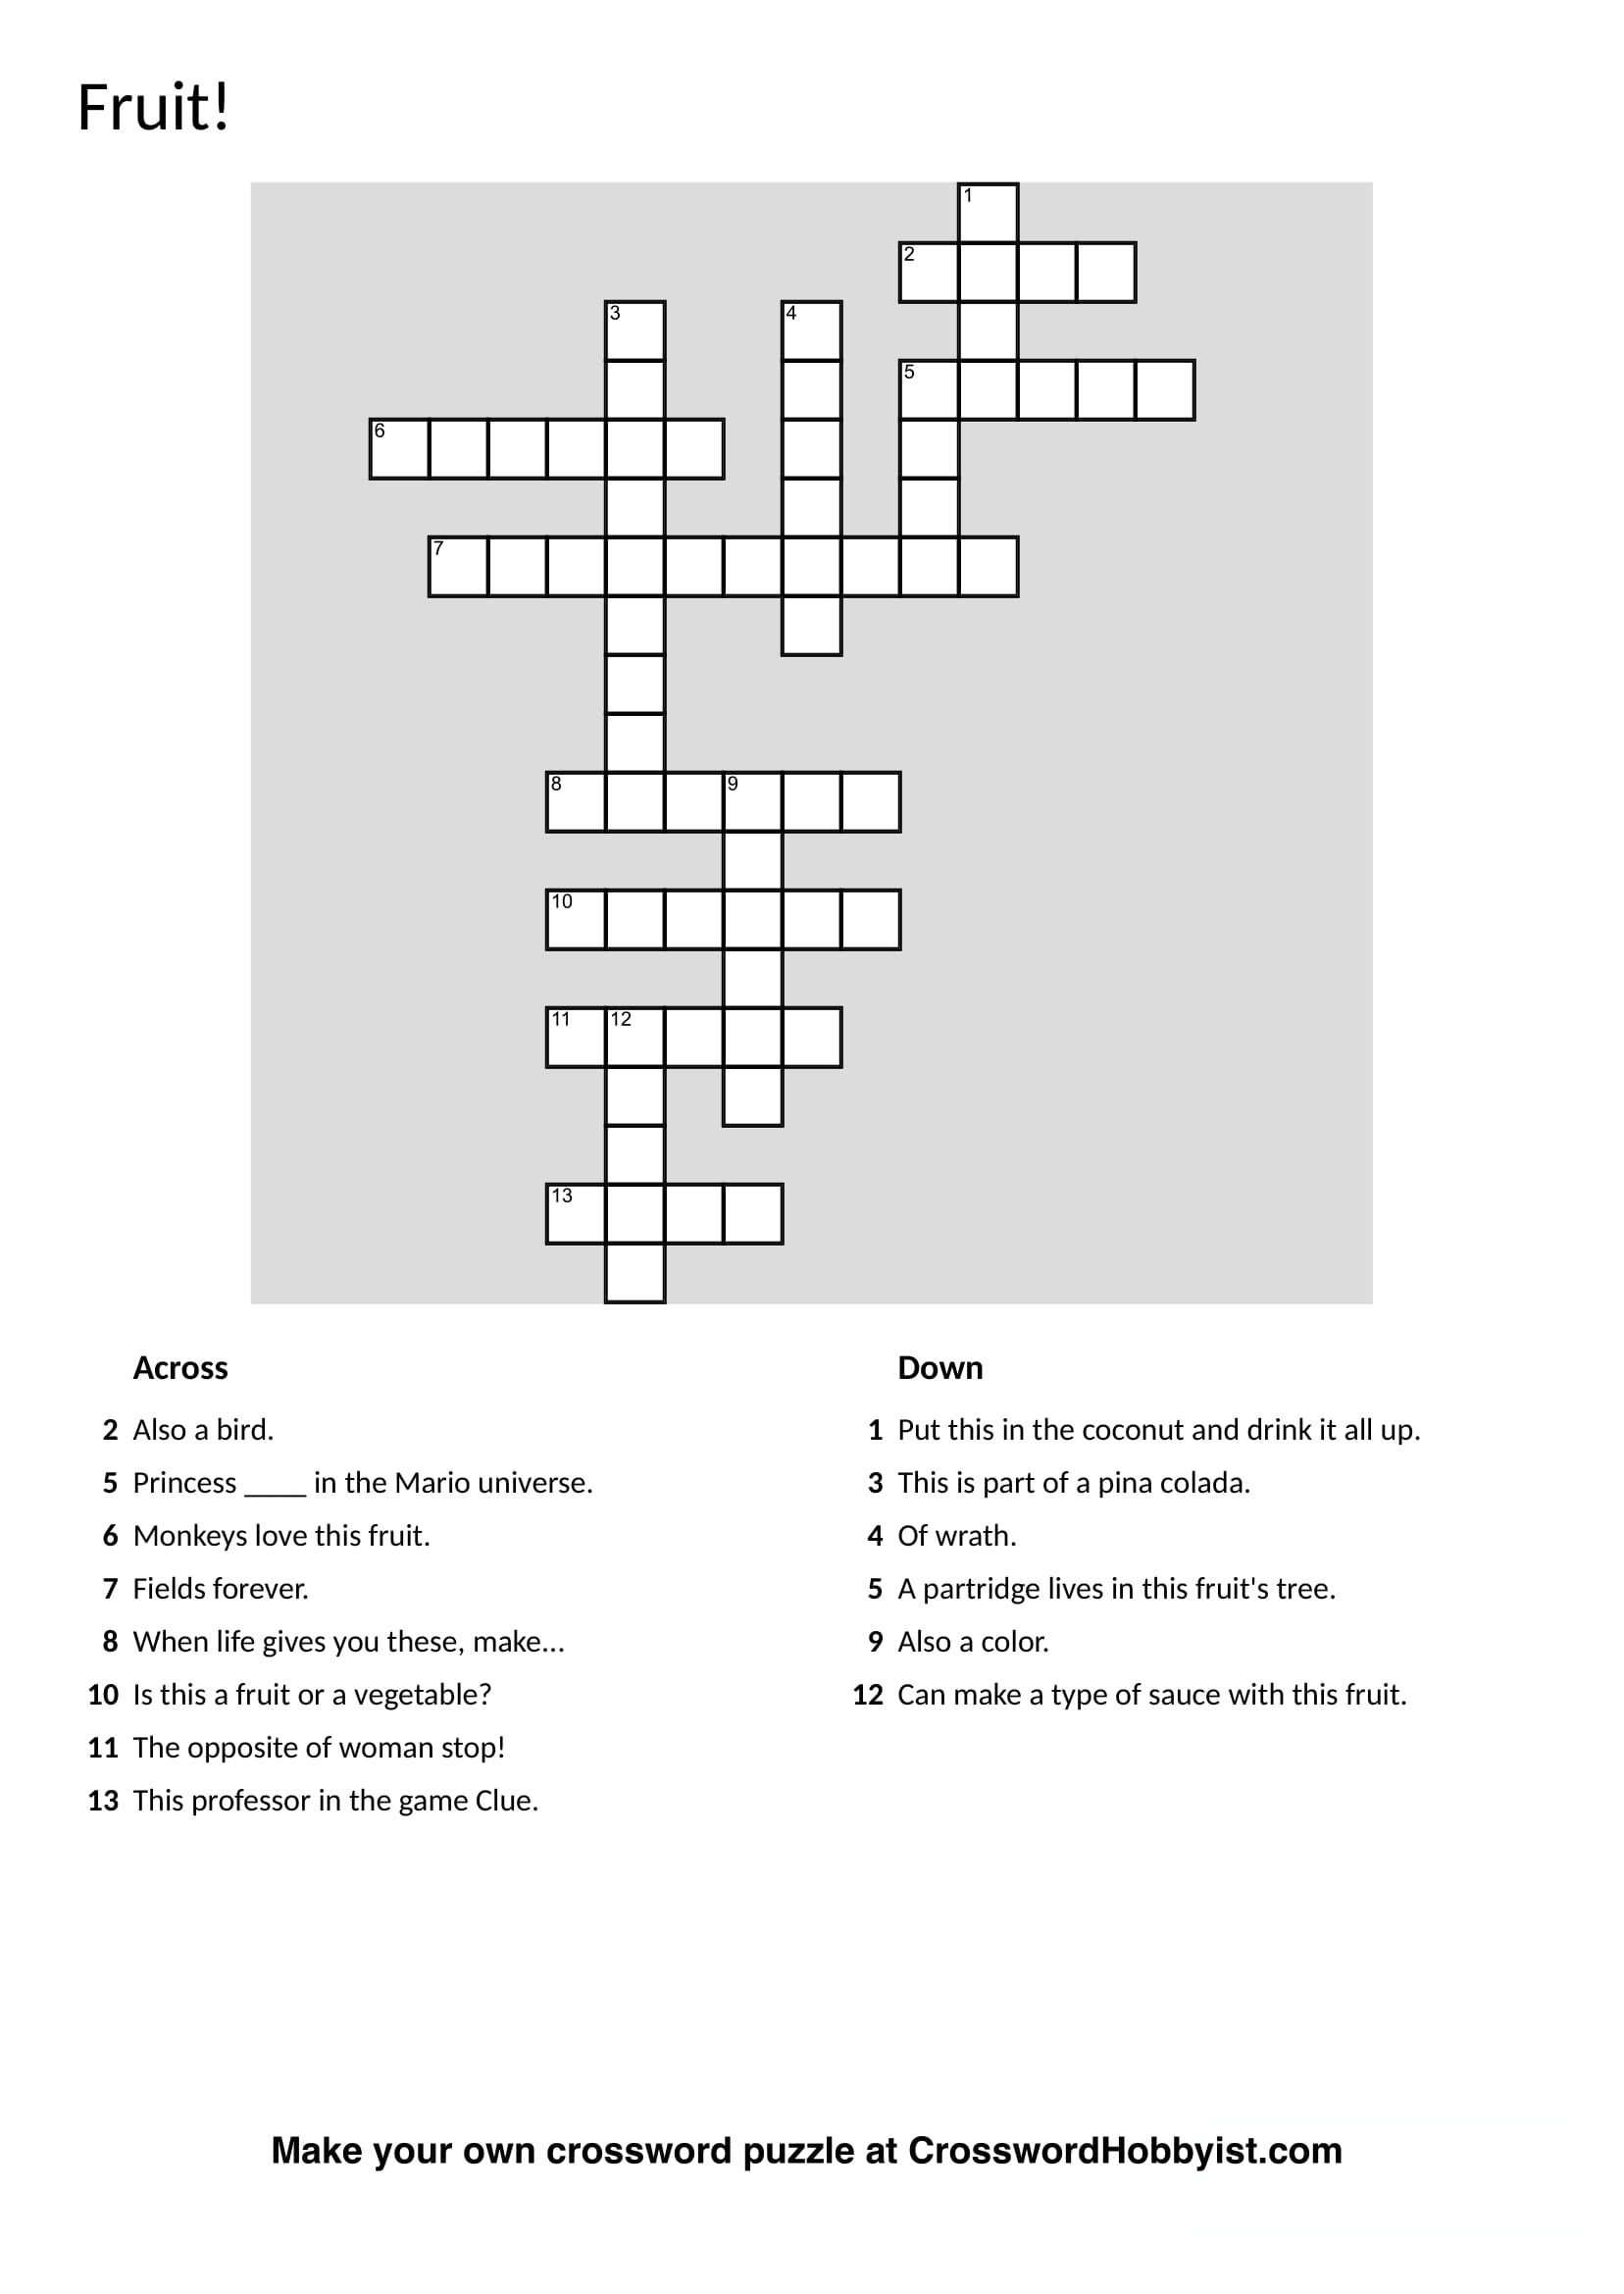 Make Your Own Fun Crossword Puzzles With Crosswordhobbyist - Make Your Own Crossword Puzzle Free Printable With Answer Key